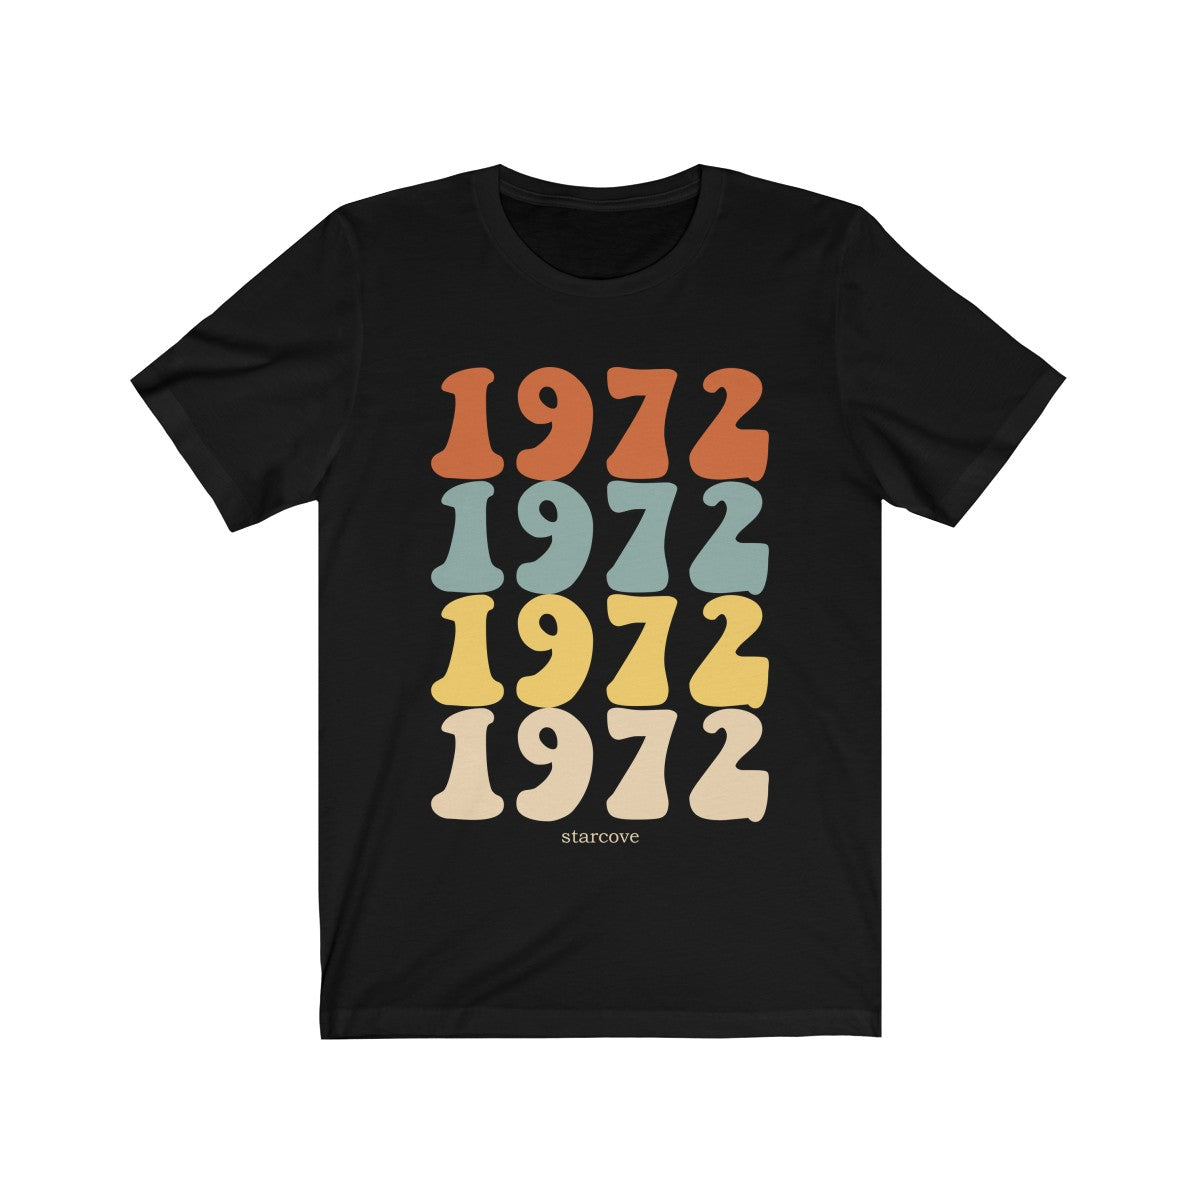 1972 shirt, 50th Birthday Party Turning 50 Years, 70s Retro Vintage gift Idea Women Men, Born Made in 1972 Funny Present TShirt Starcove Fashion